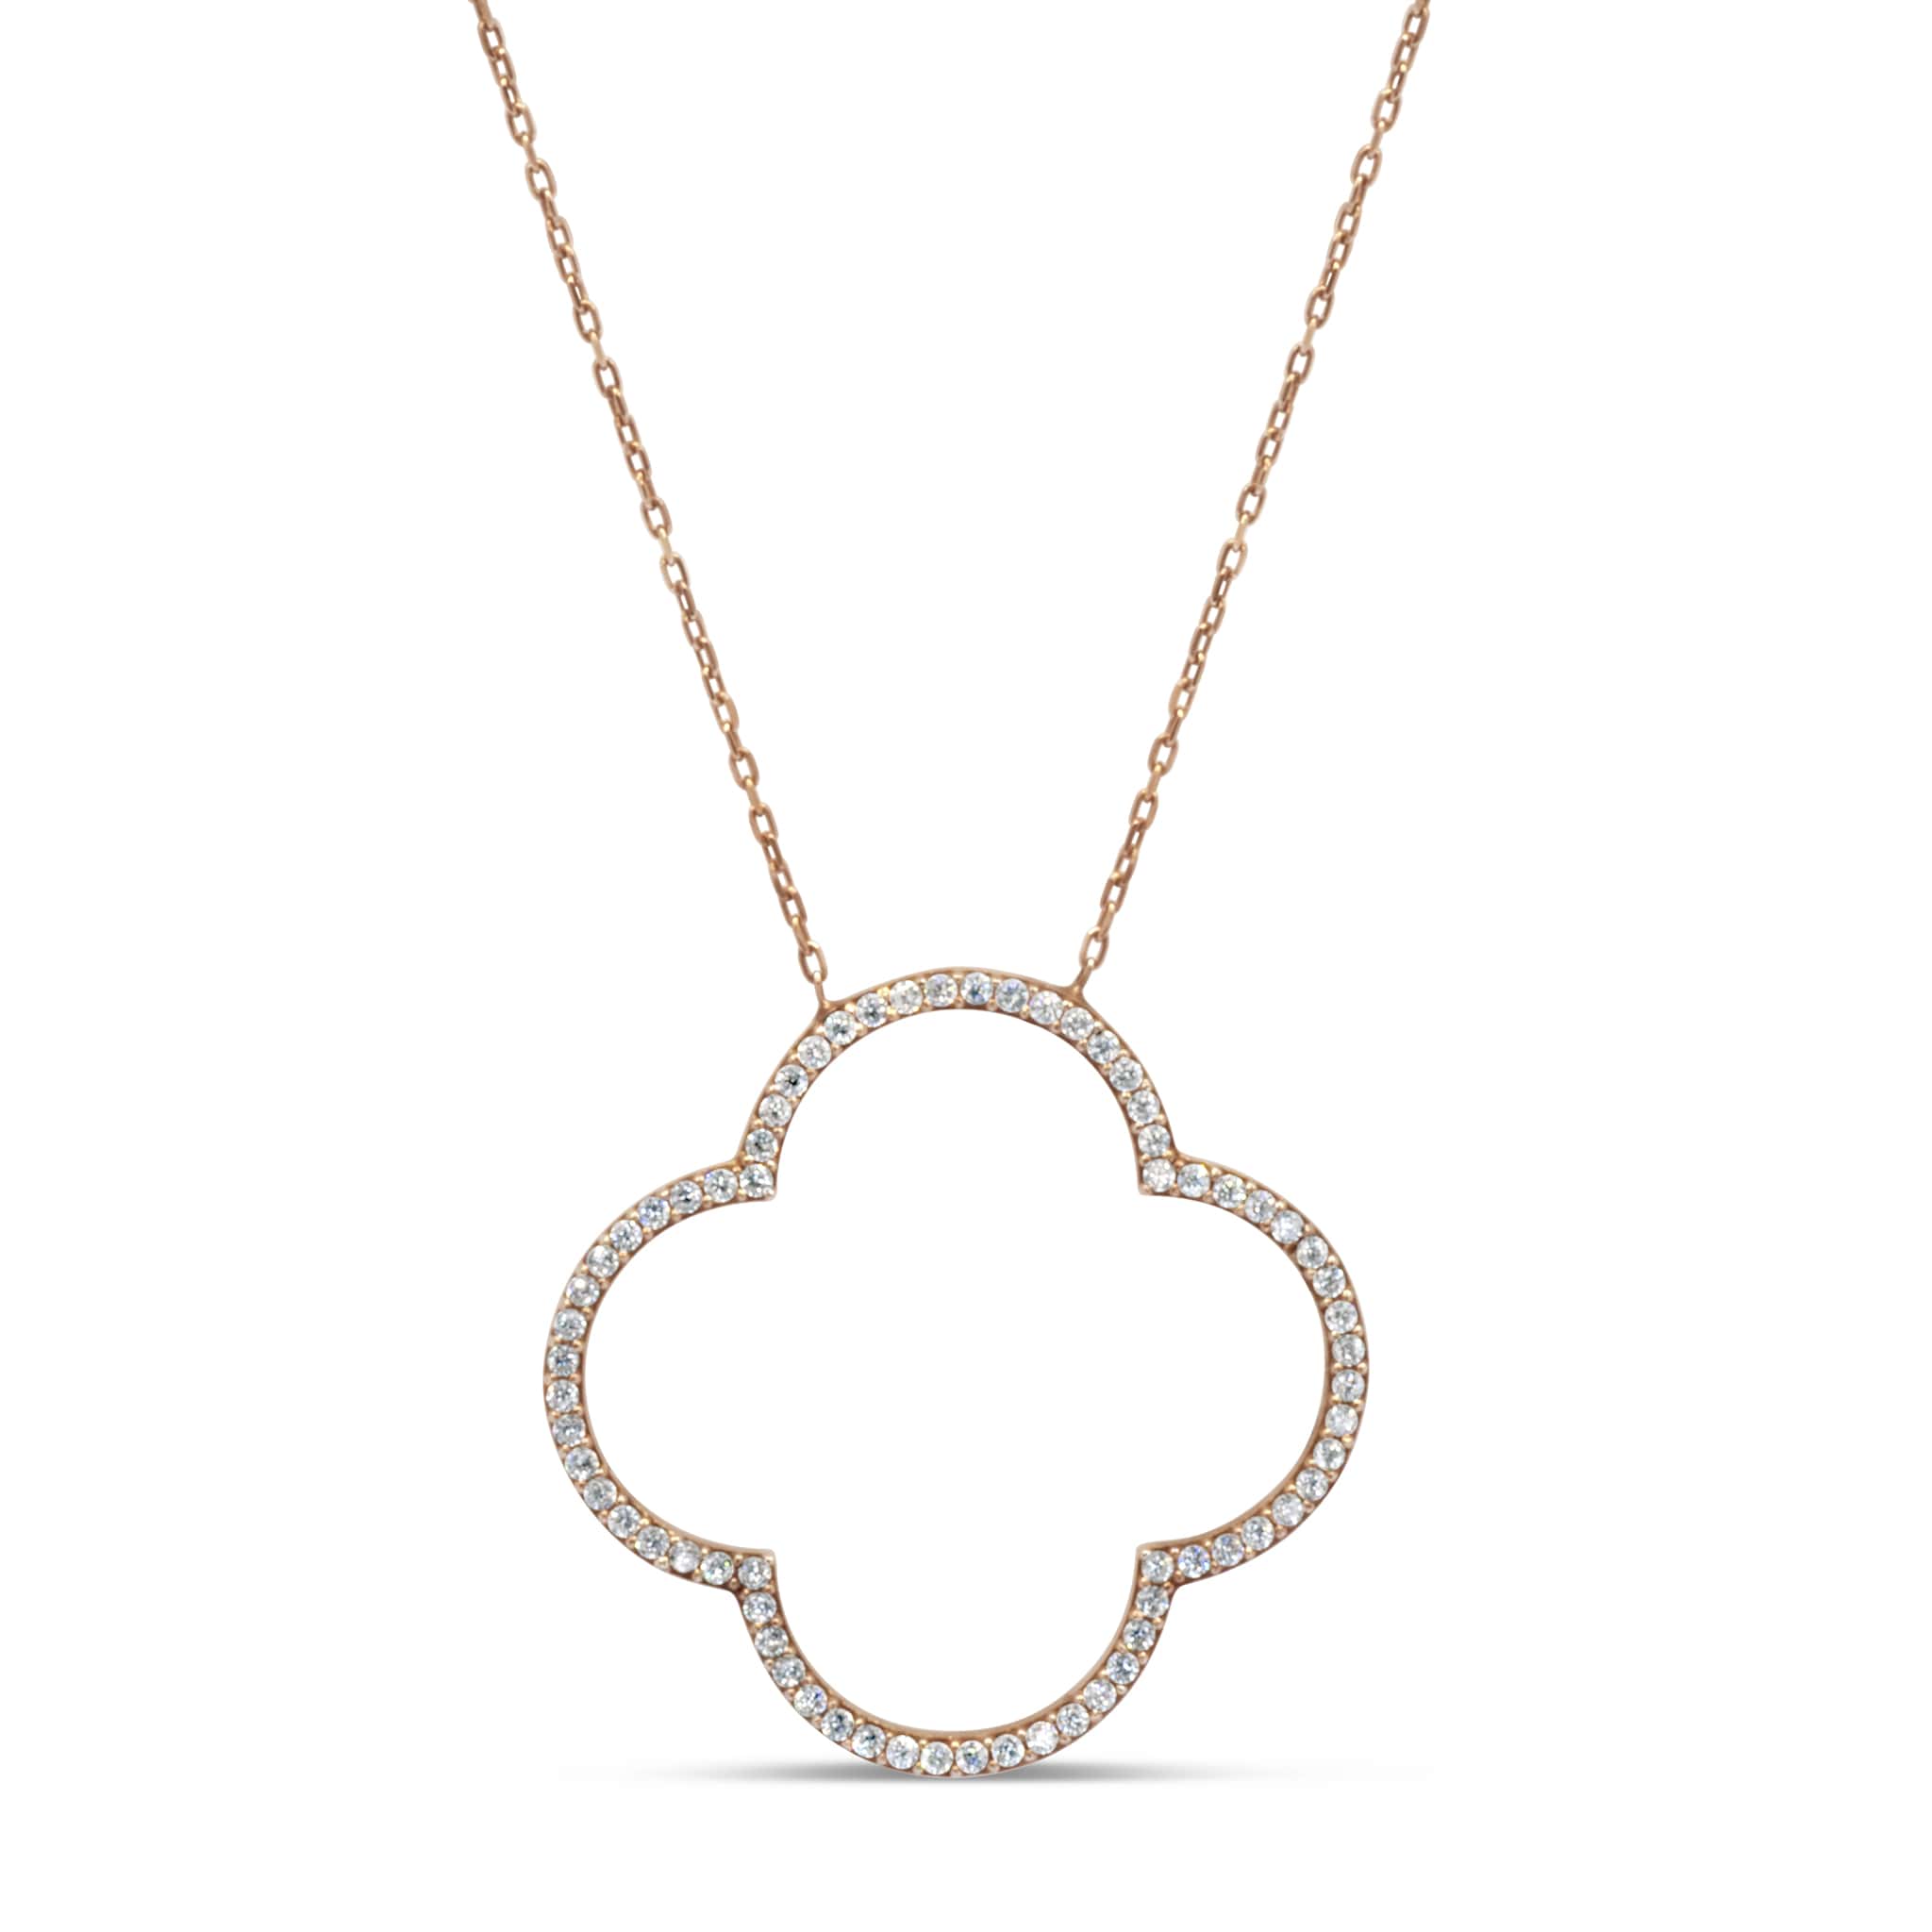 Four-Leaf Clover Necklace Encrusted with Cubic Zirconia in gold plated